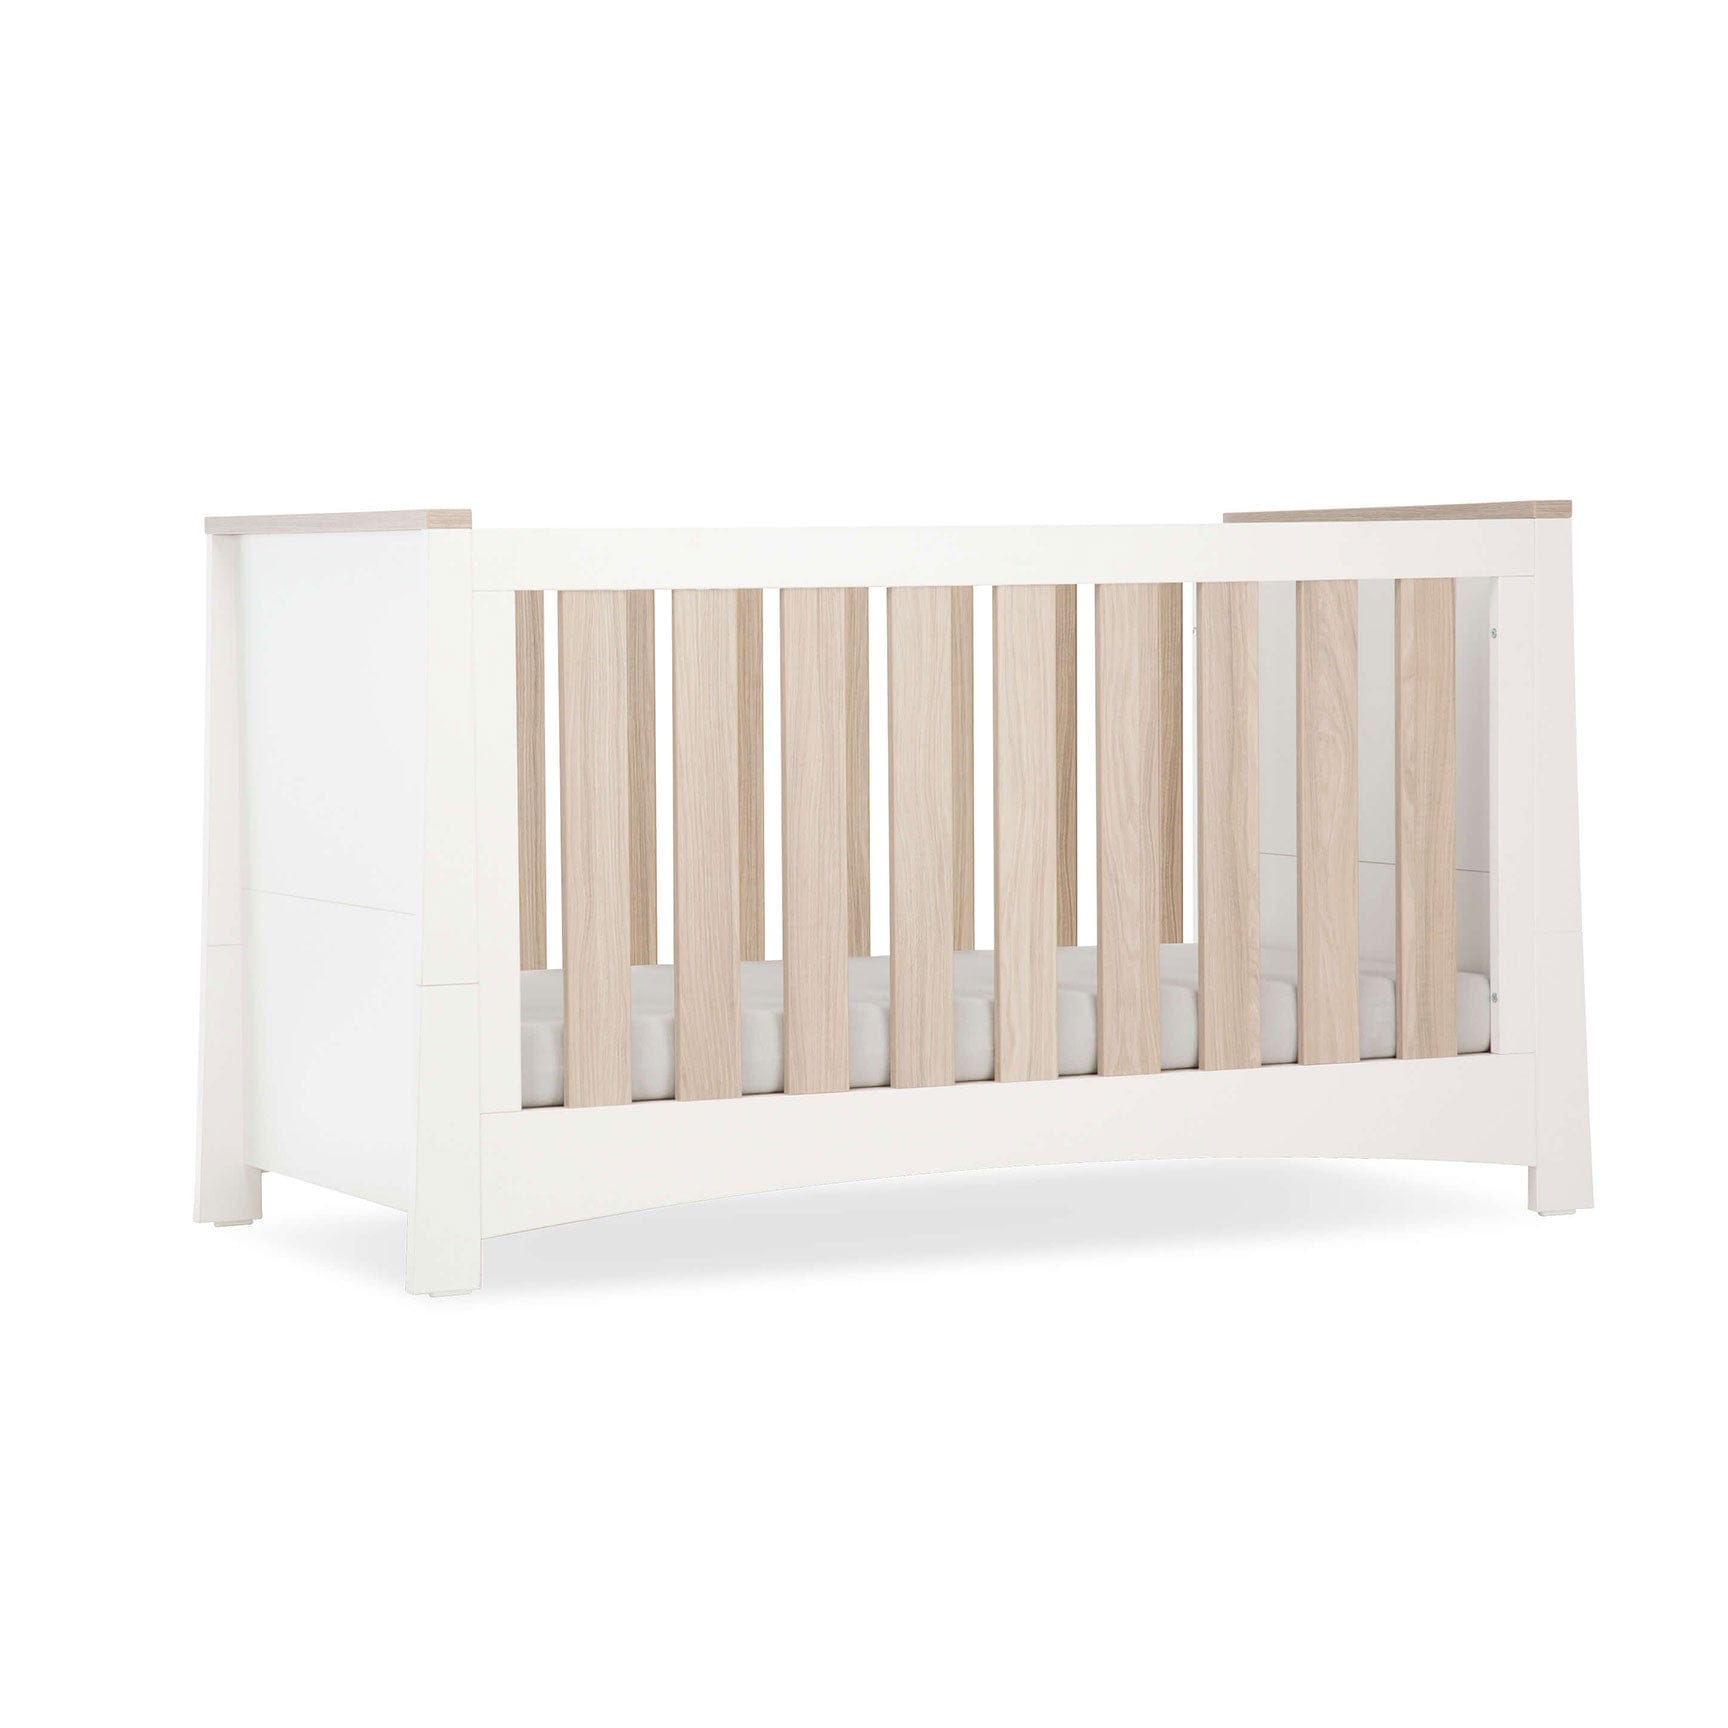 CuddleCo Cot Beds CuddleCo Ada Cotbed